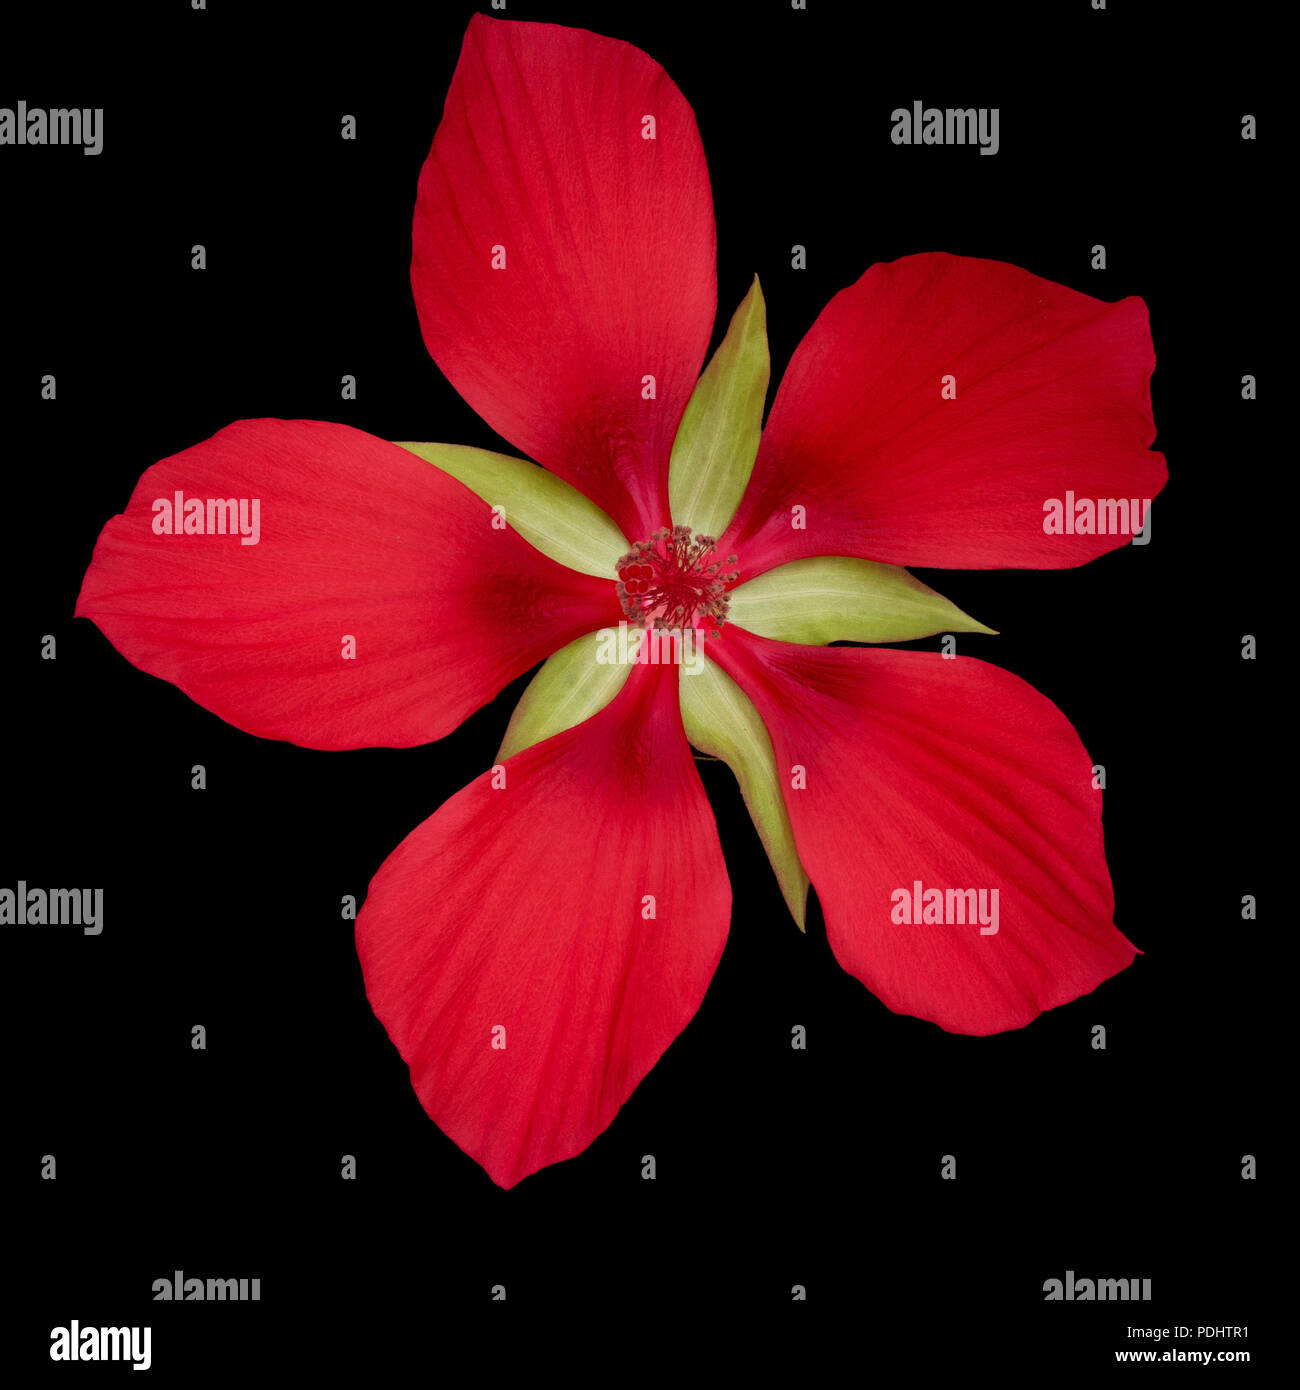 Hibiscus coccineus or scarlet rosemallow, huge, exuberant red flower isolated on black. Aka Texas star, brilliant or scarlet hibiscuss. Stock Photo